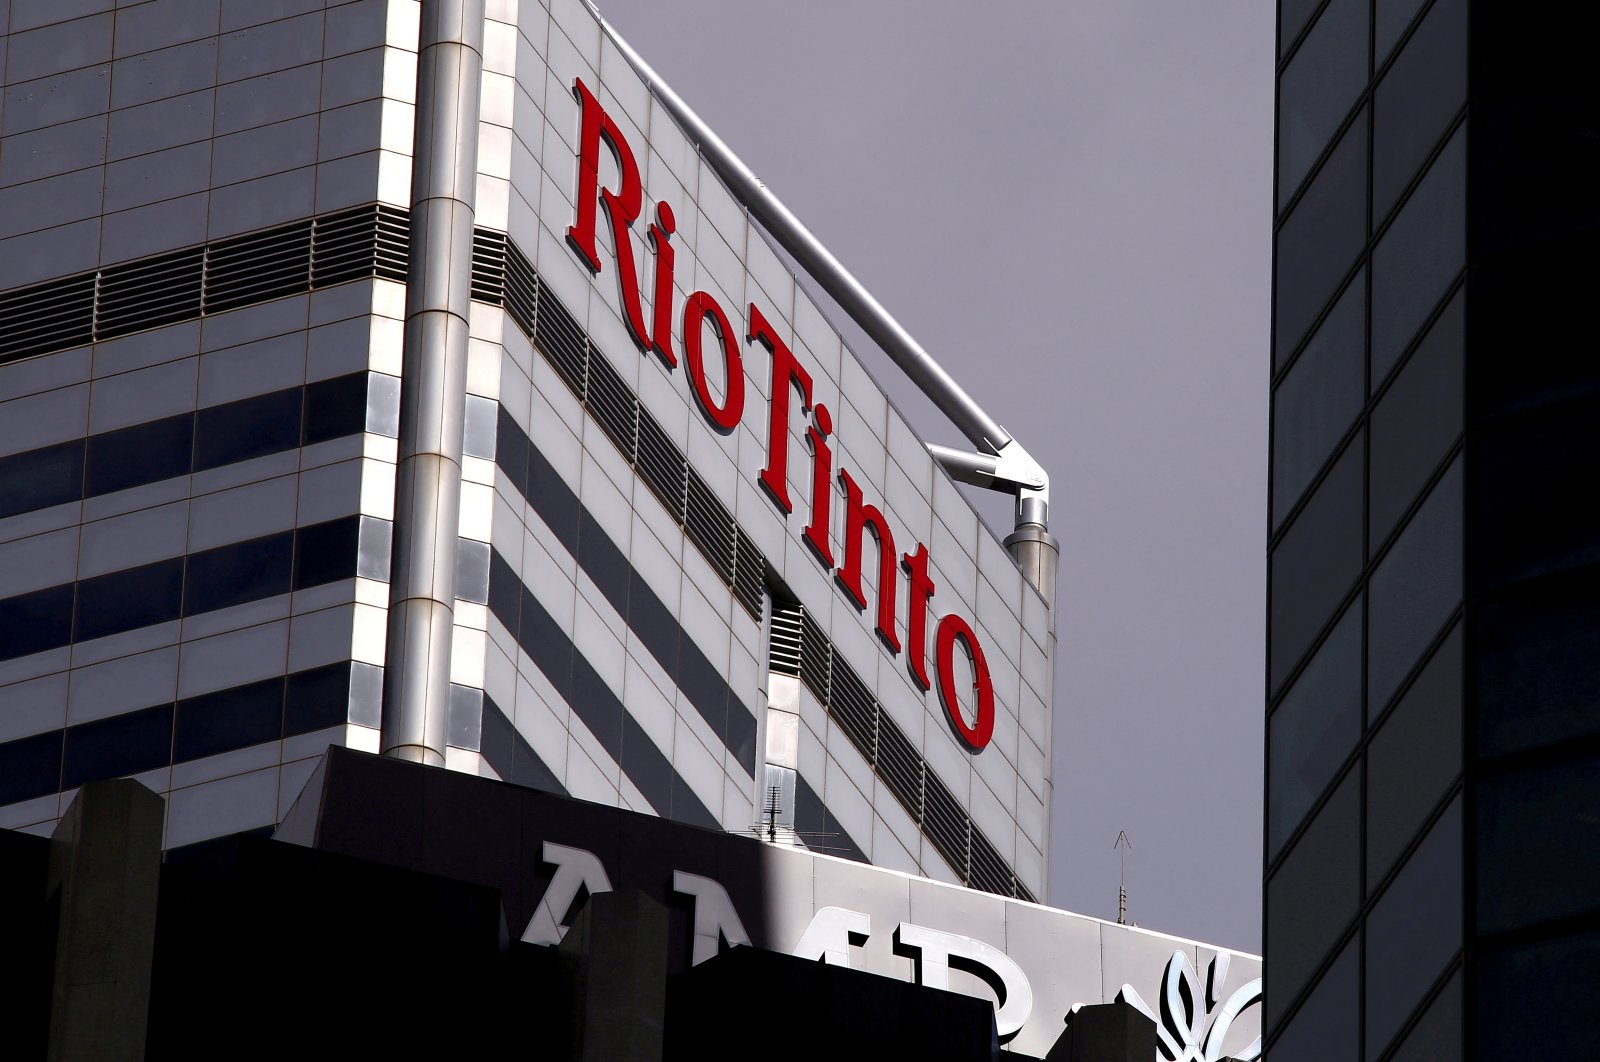 A sign adorns the building where mining company Rio Tinto has its office in Perth, Western Australia, Nov. 19, 2015.